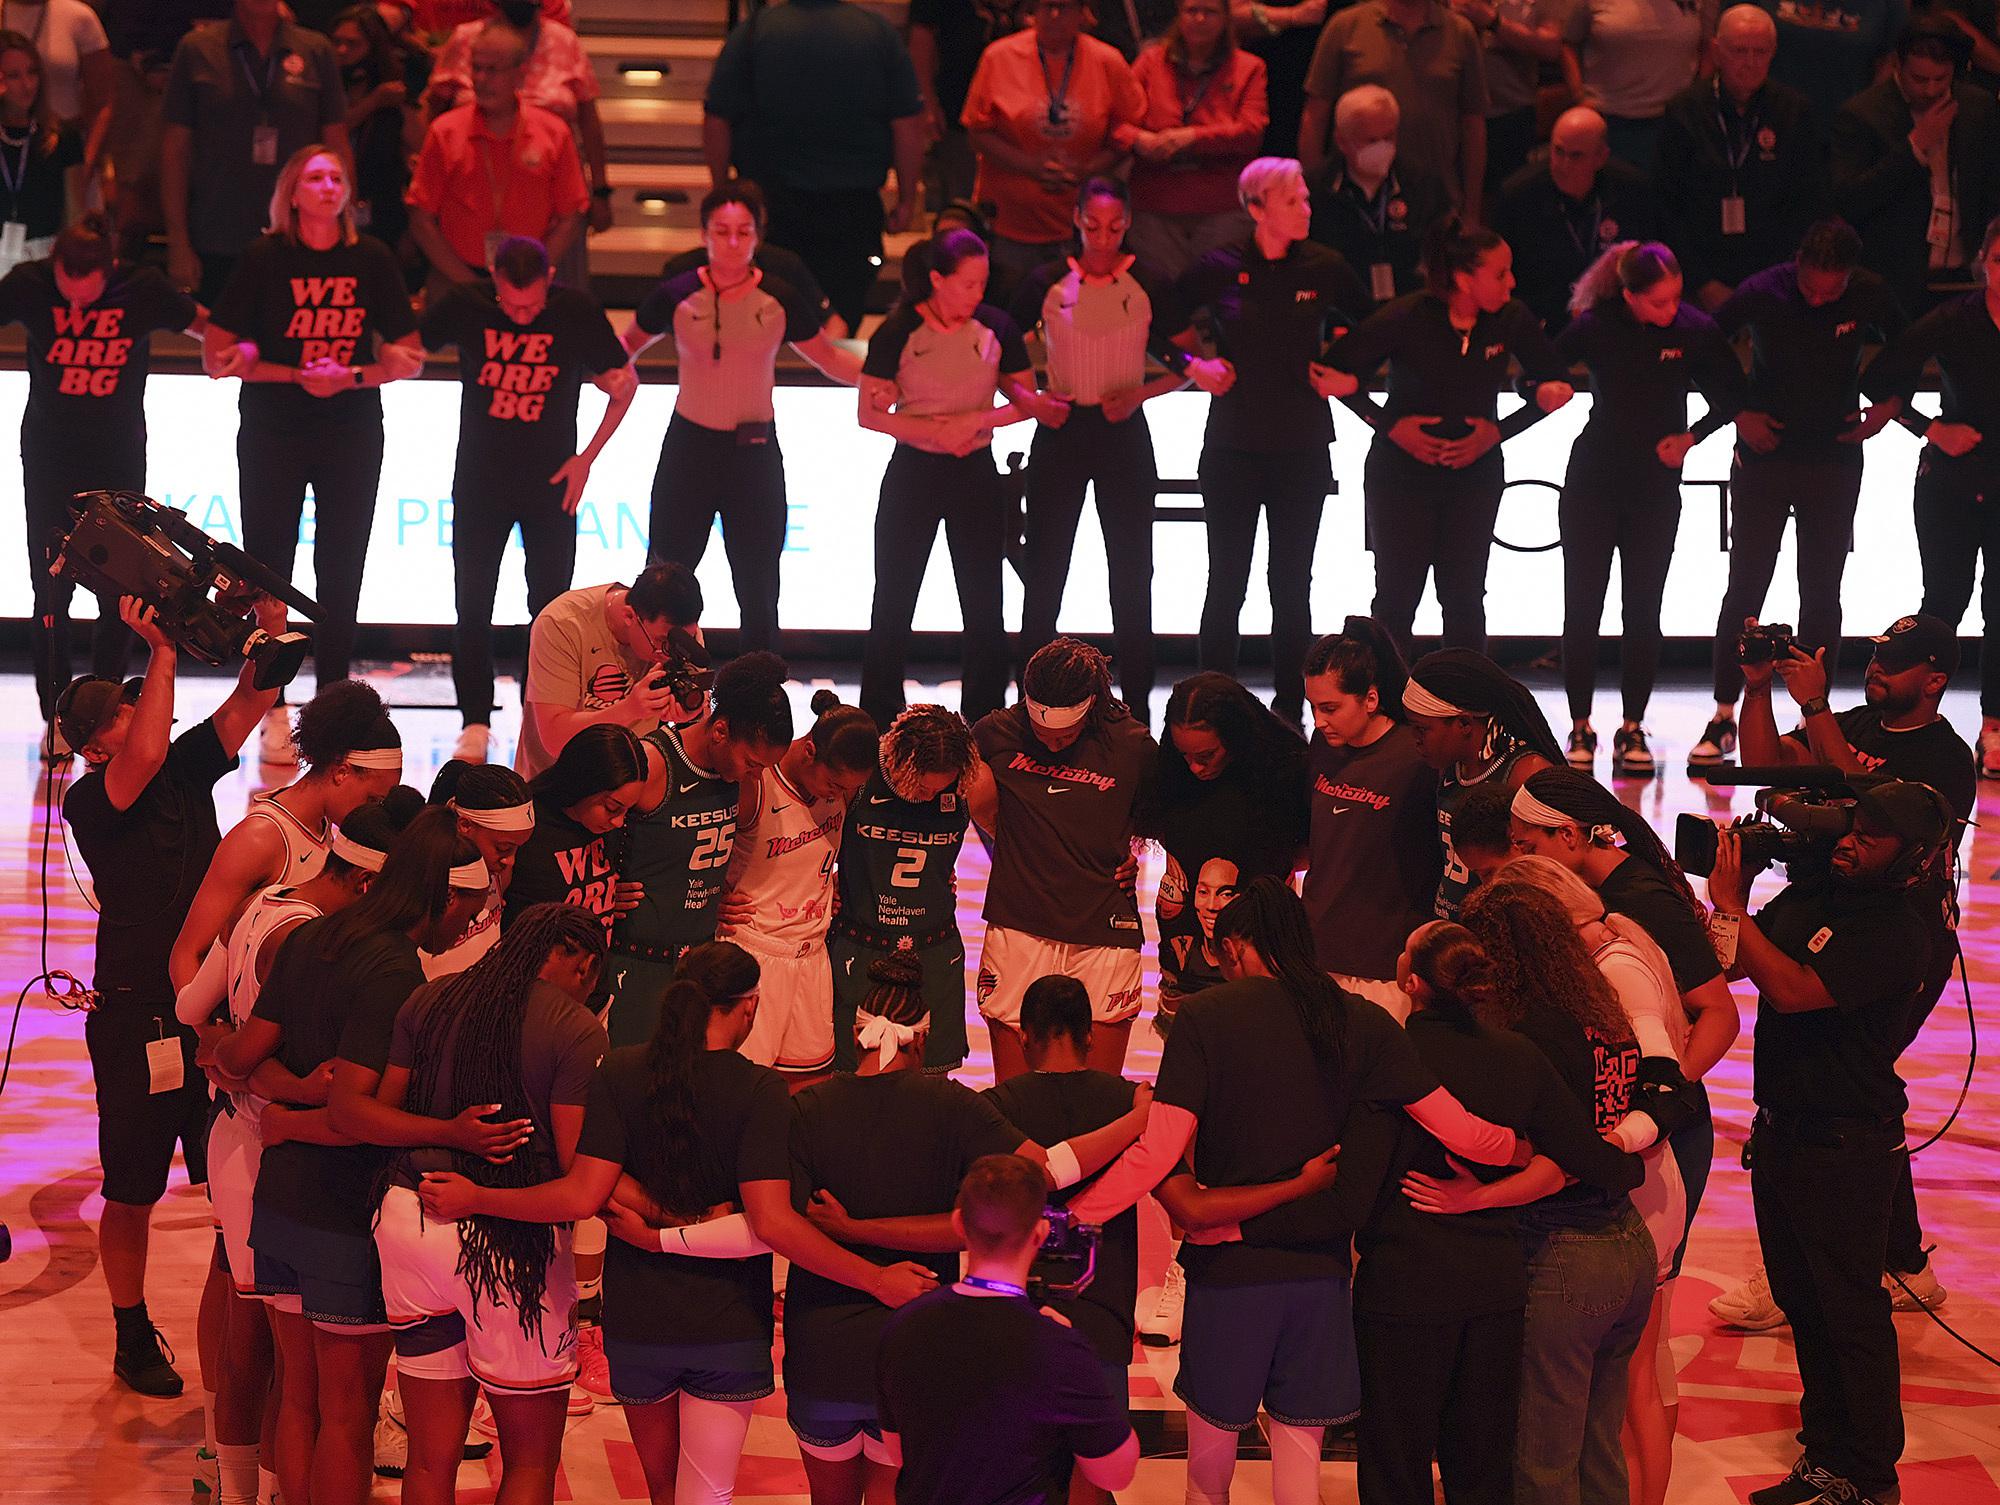 Brittney Griner recognized with WNBA moment of silence